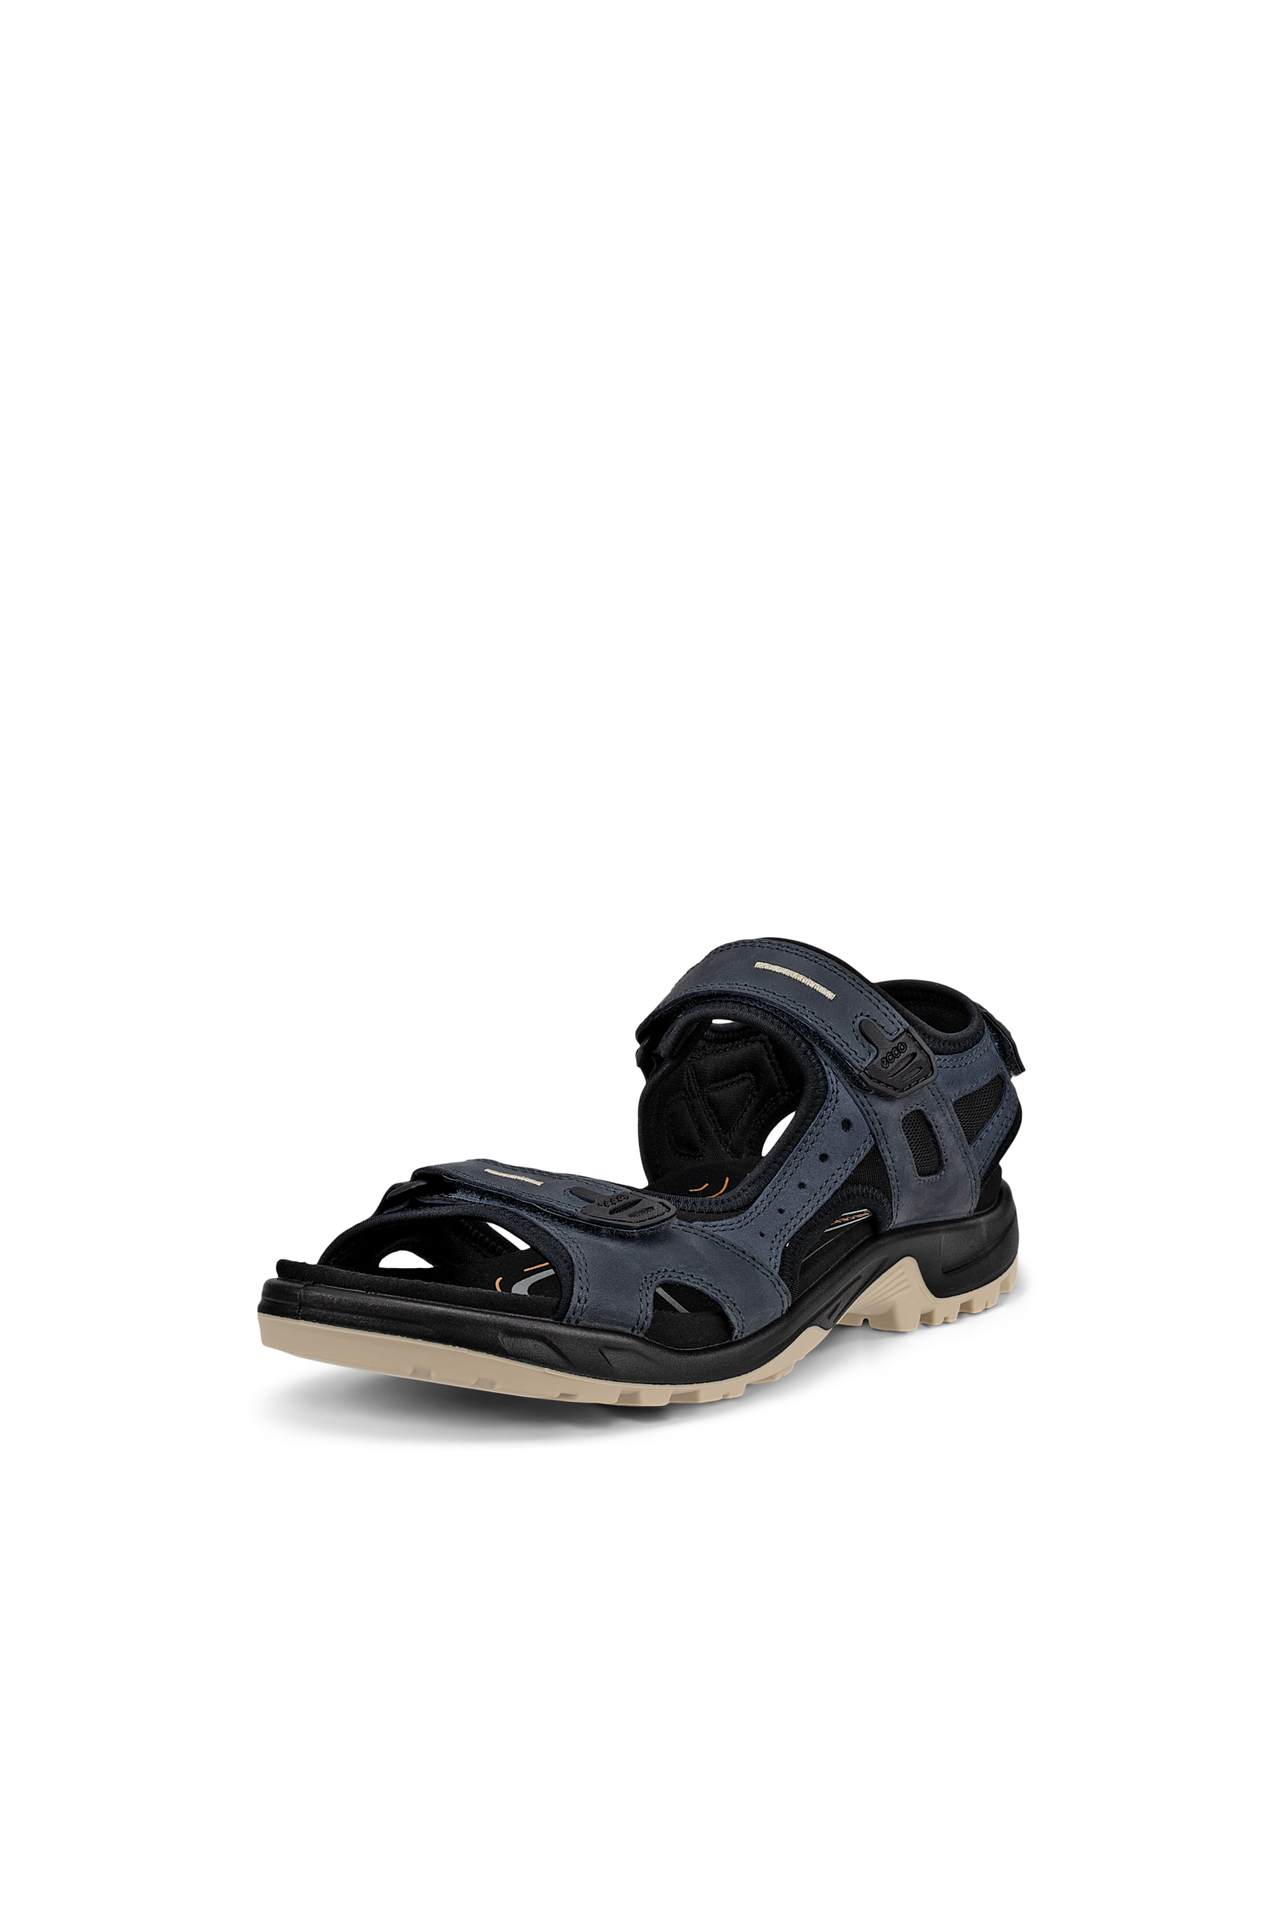 Ecco Mens 069564-02415 Offroad sports sandal in Navy